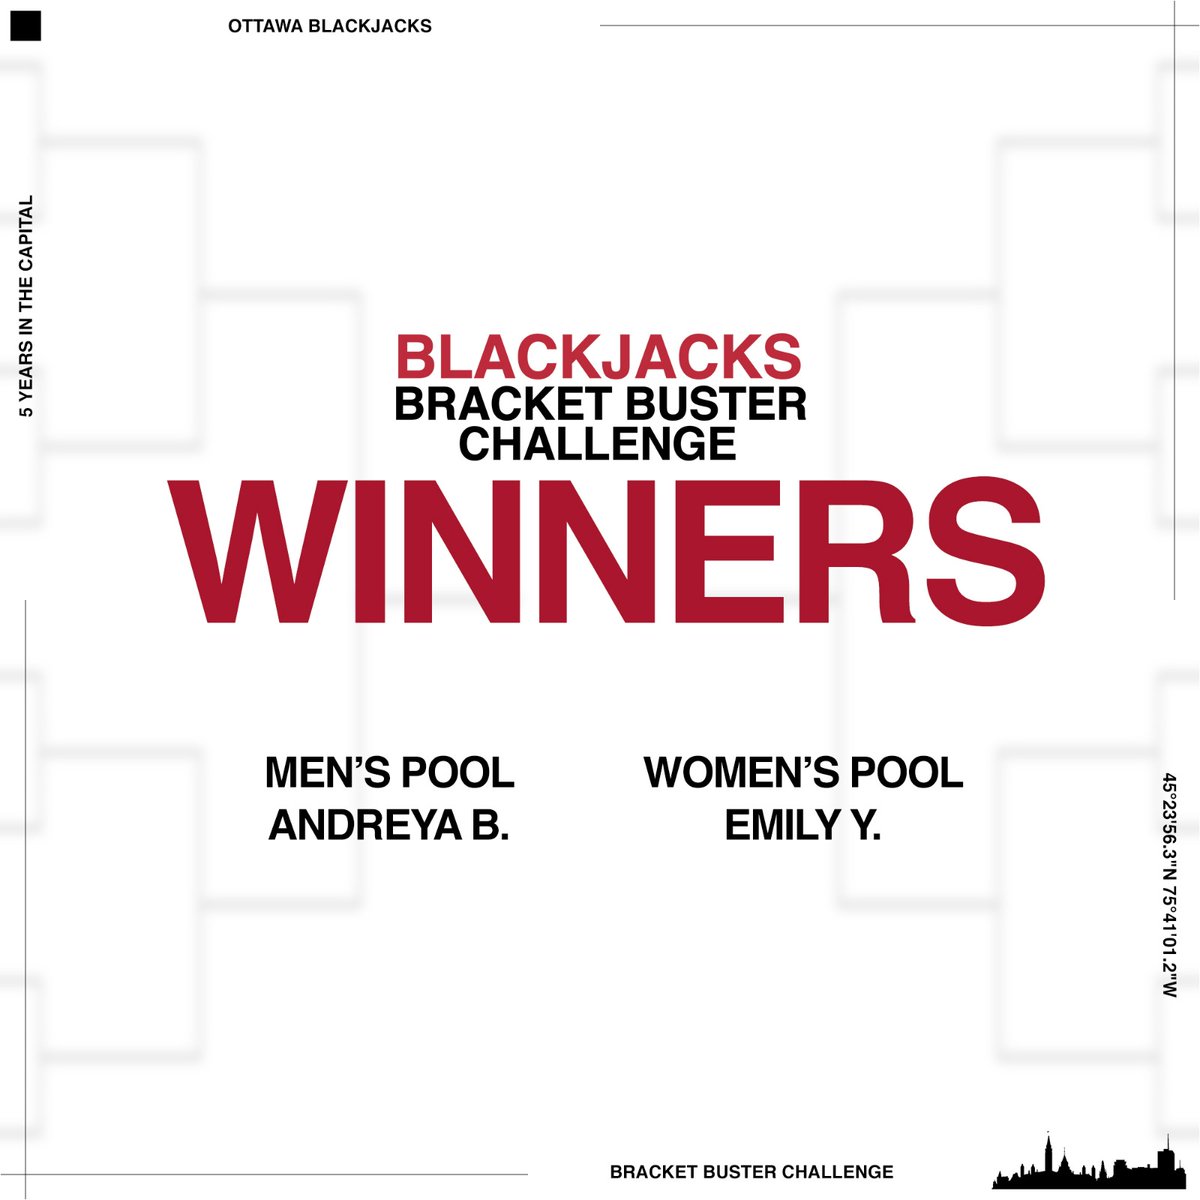 Big congratulations to our men's and women's pool champions 🏆

We would also like to announce our randomly selected winners: Aubrey O. and Radomir P.

All recipients will be contacted via email this week. Thank you to everyone that participated! 👏 

#TheCapital | #OurGame